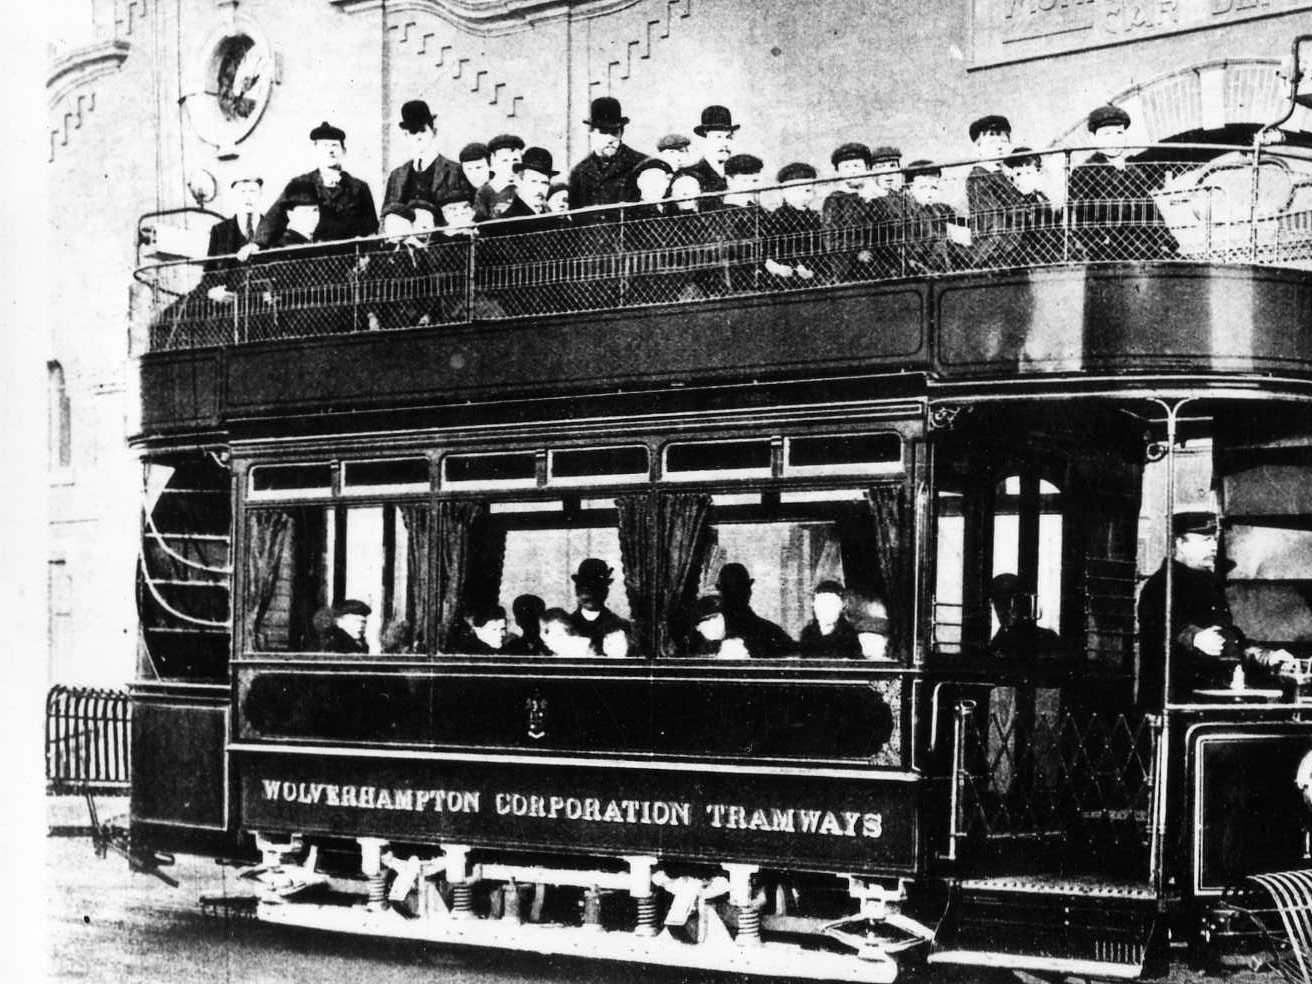 Victorian transport pioneers didn't hang about – they built three tramlines in a matter of months